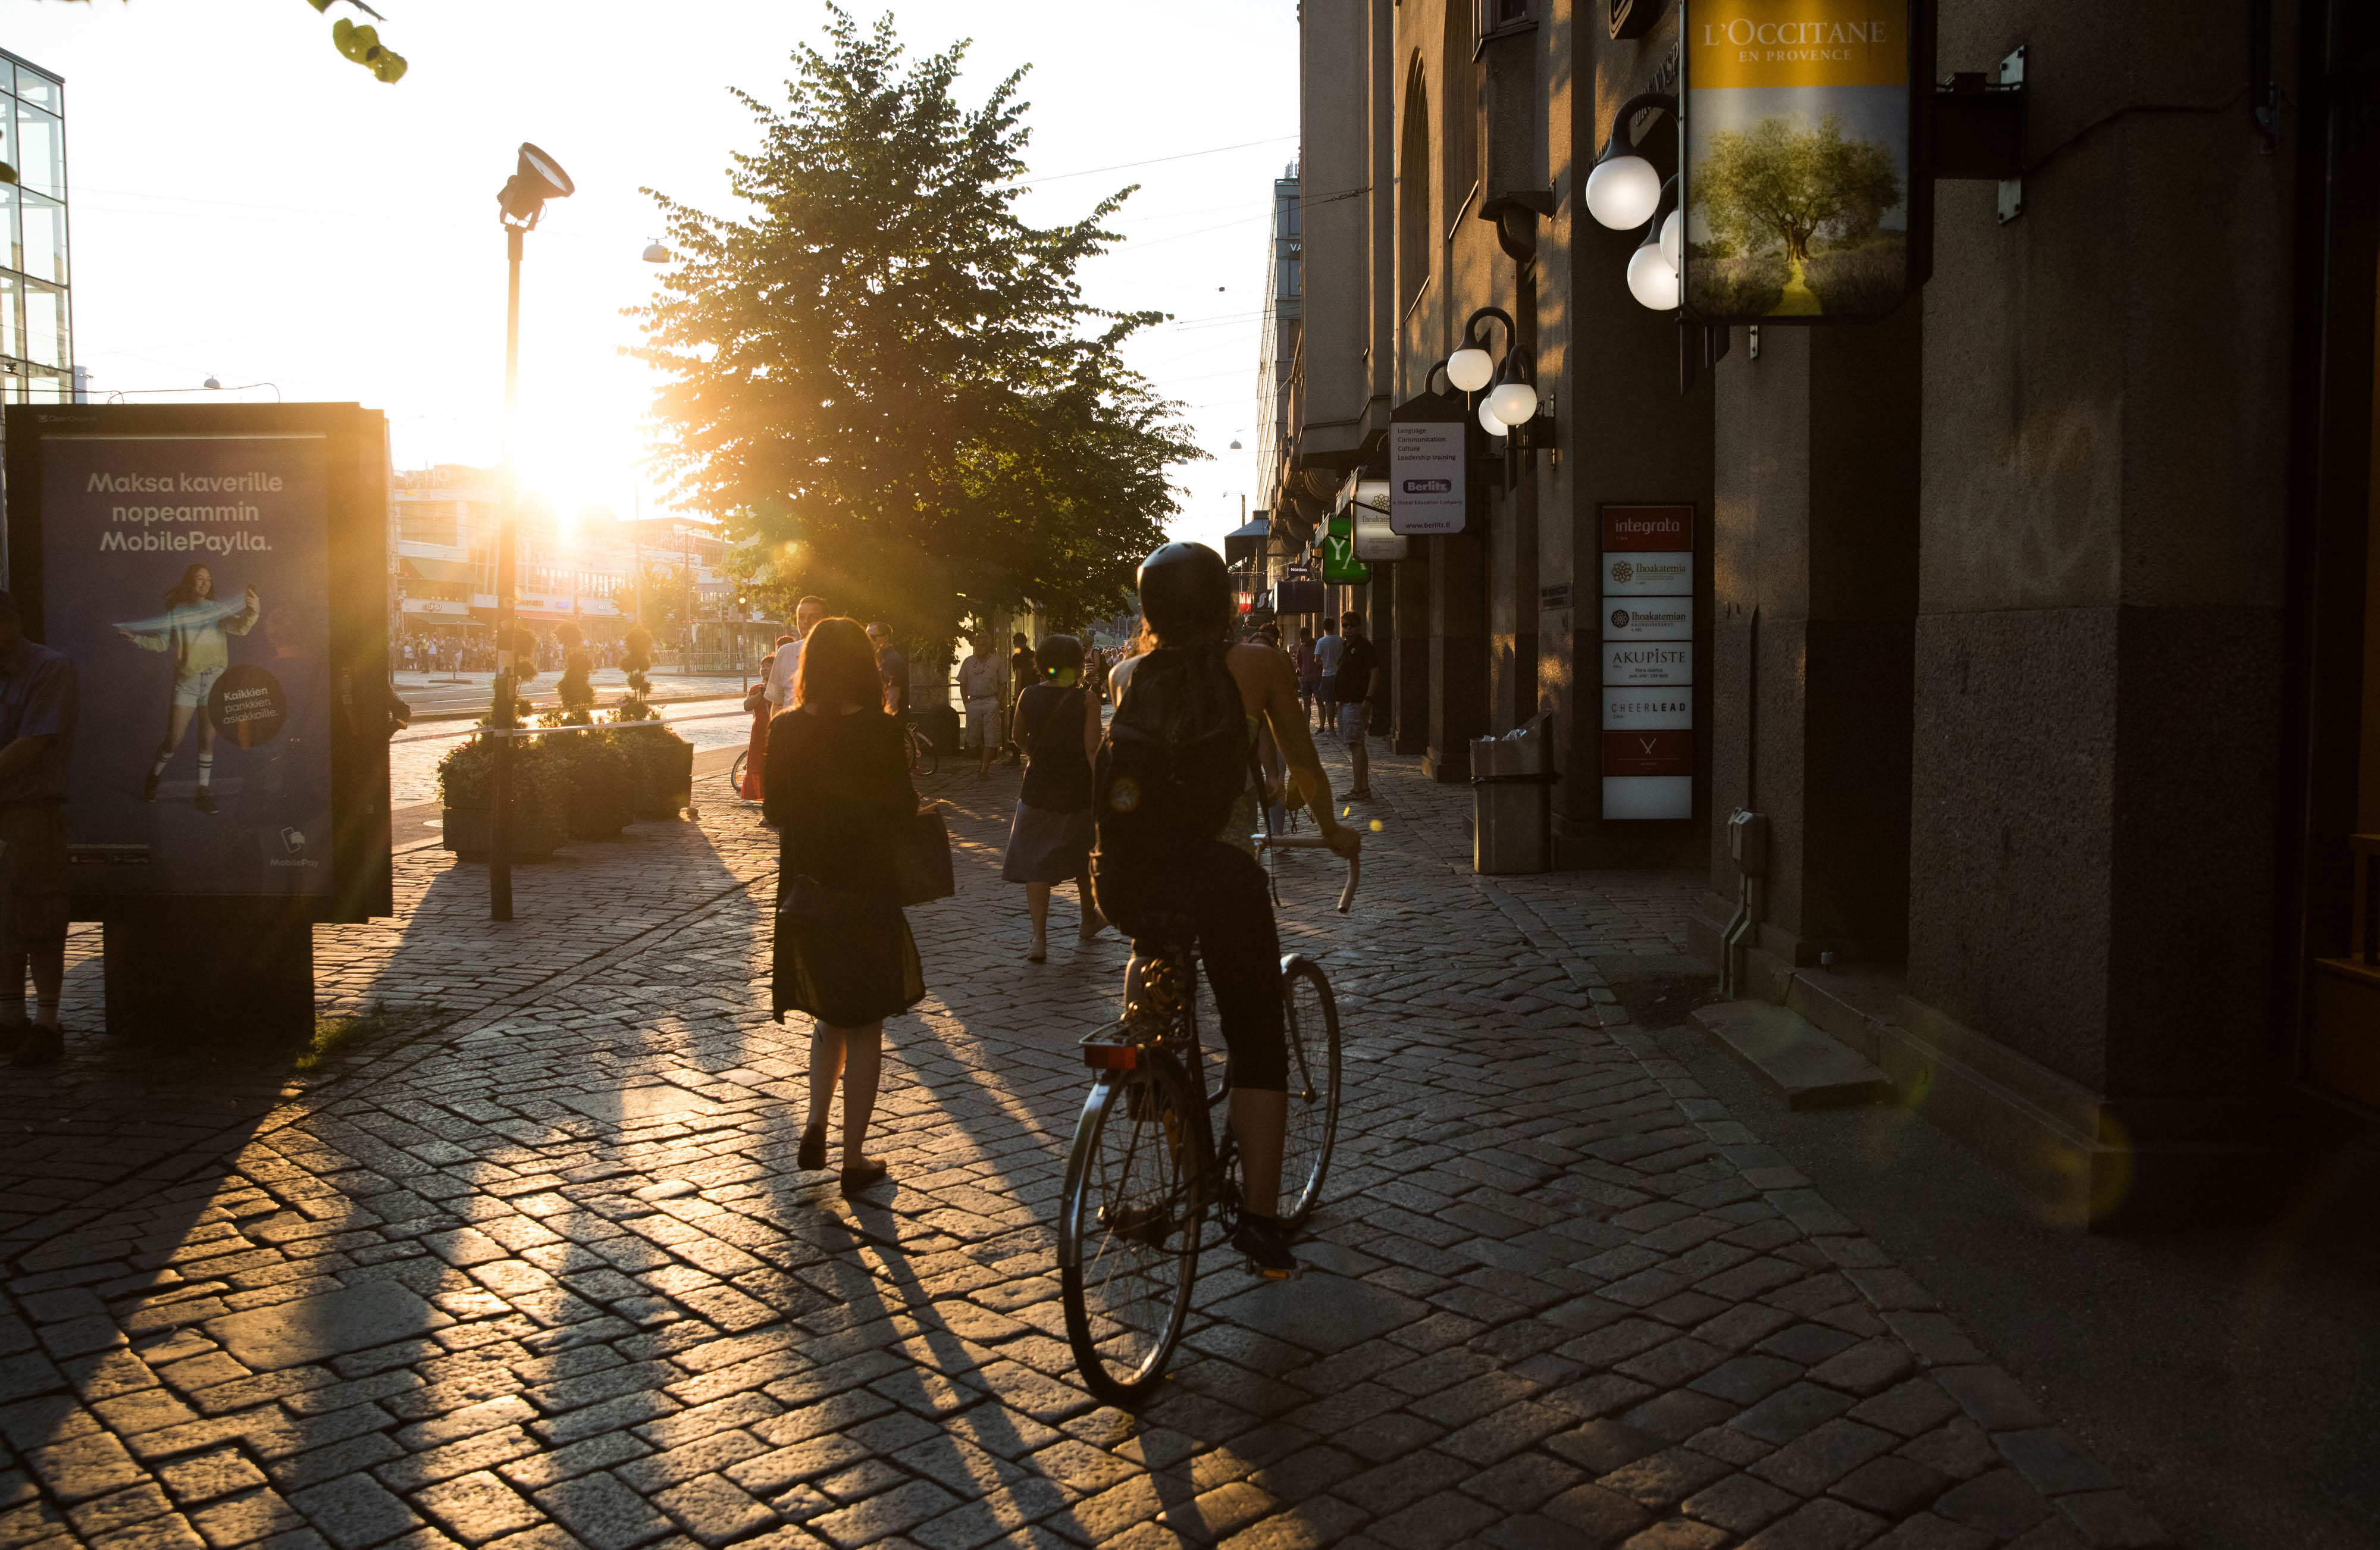 A cyclist rides down a street as the sun sets in Helsinki, Finland, on Monday, July 16, 2018. Photographer: Chris Ratcliffe/Bloomberg via Getty Images